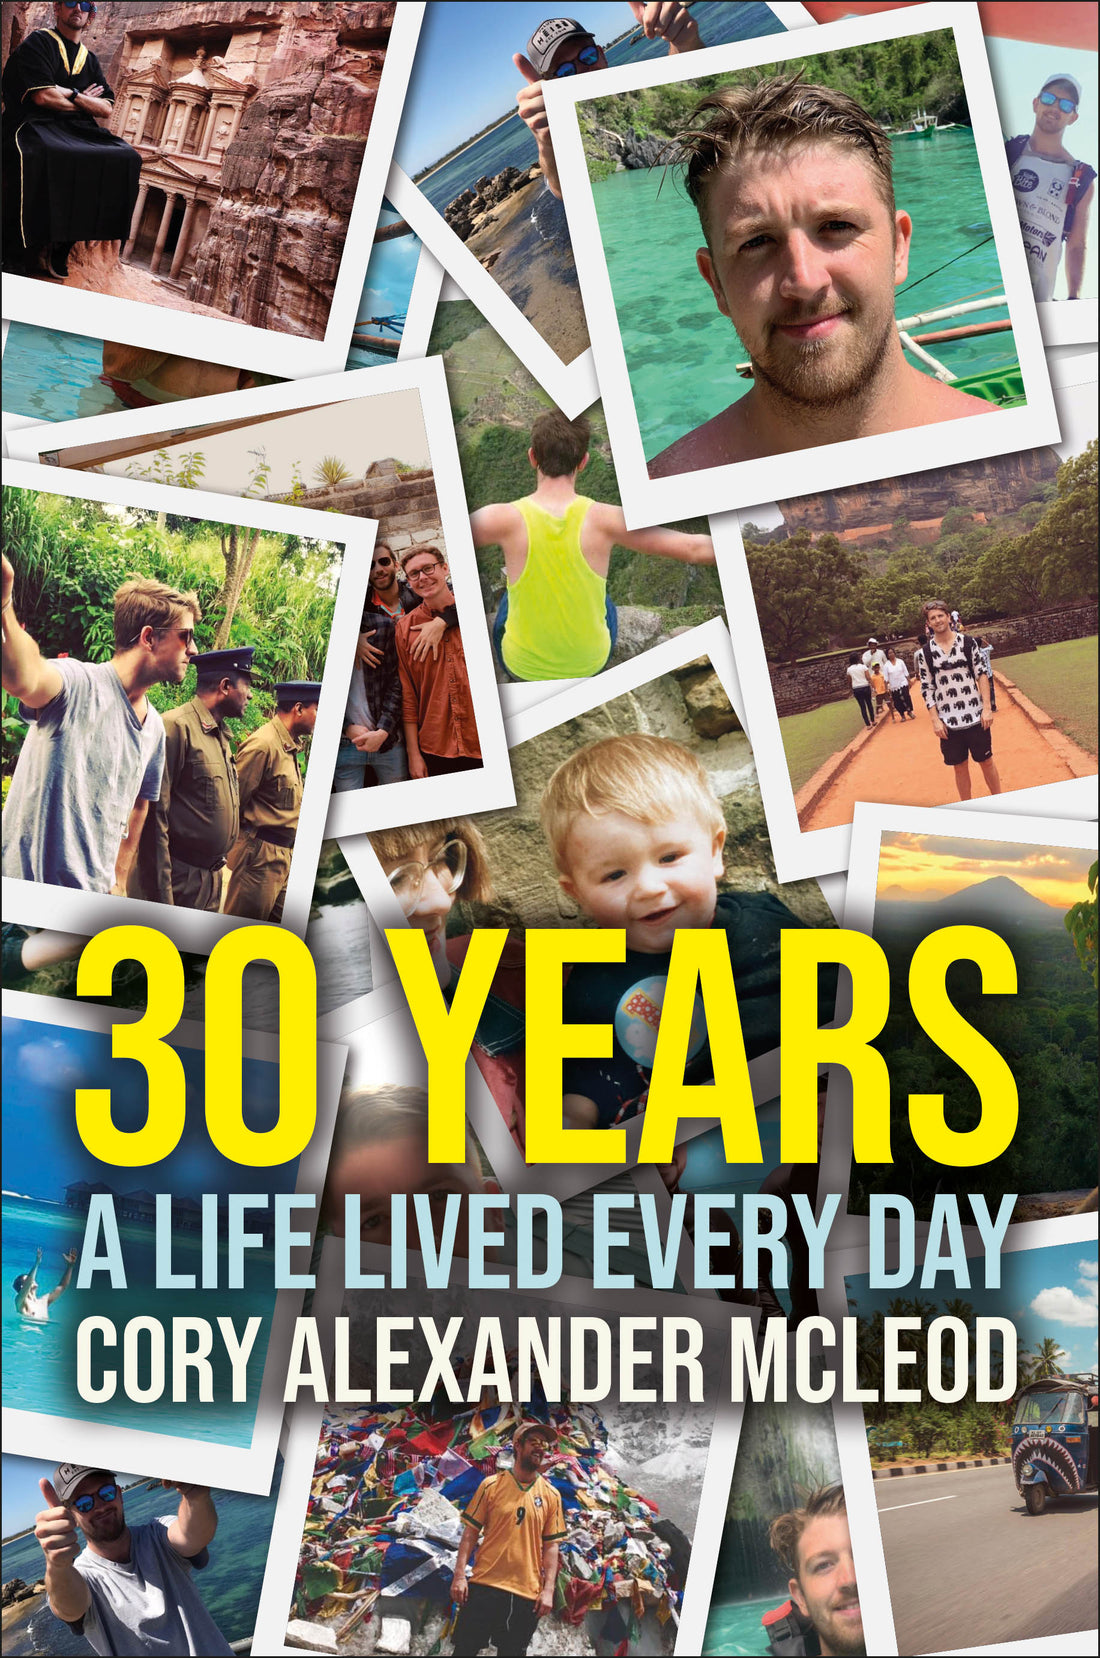 Harrogate Advertiser loves Cory McLeod's new book - "30 Years - A Life Lived Every Day"